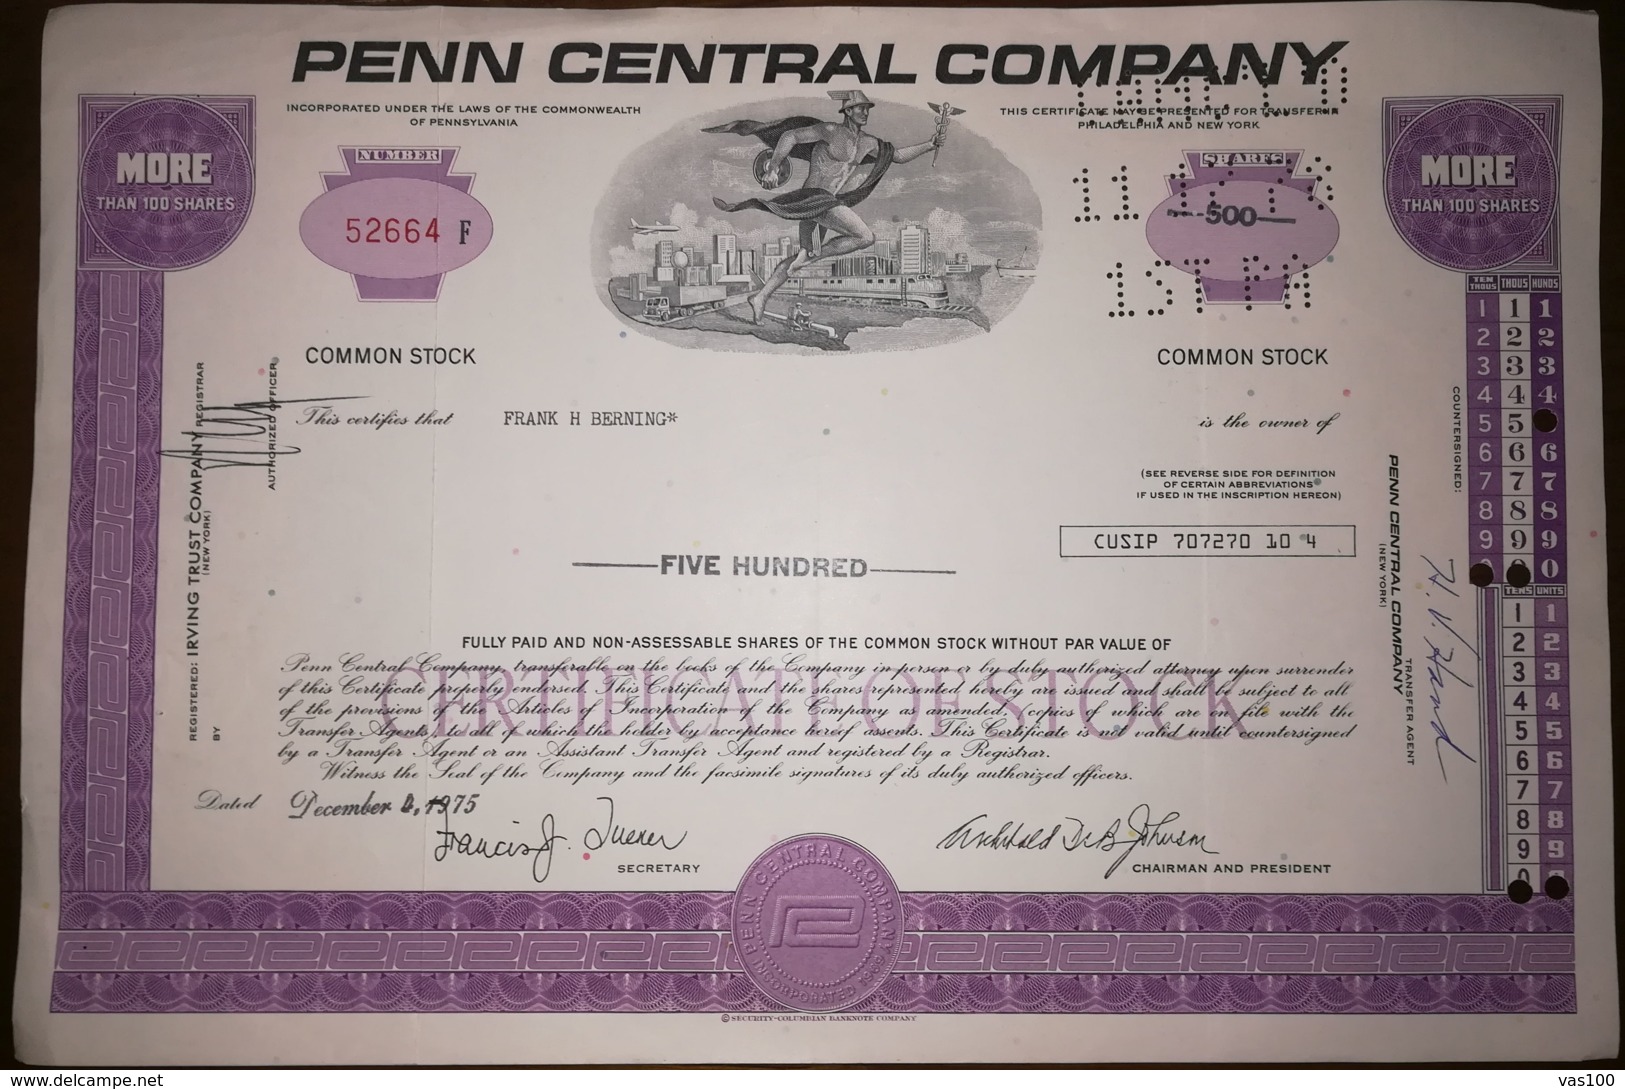 SHAREHOLDINGS, COMMON STOCK AT PENN CENTRAL COMPANY, RAILWAY, TRAINS, 1975, USA - Transport